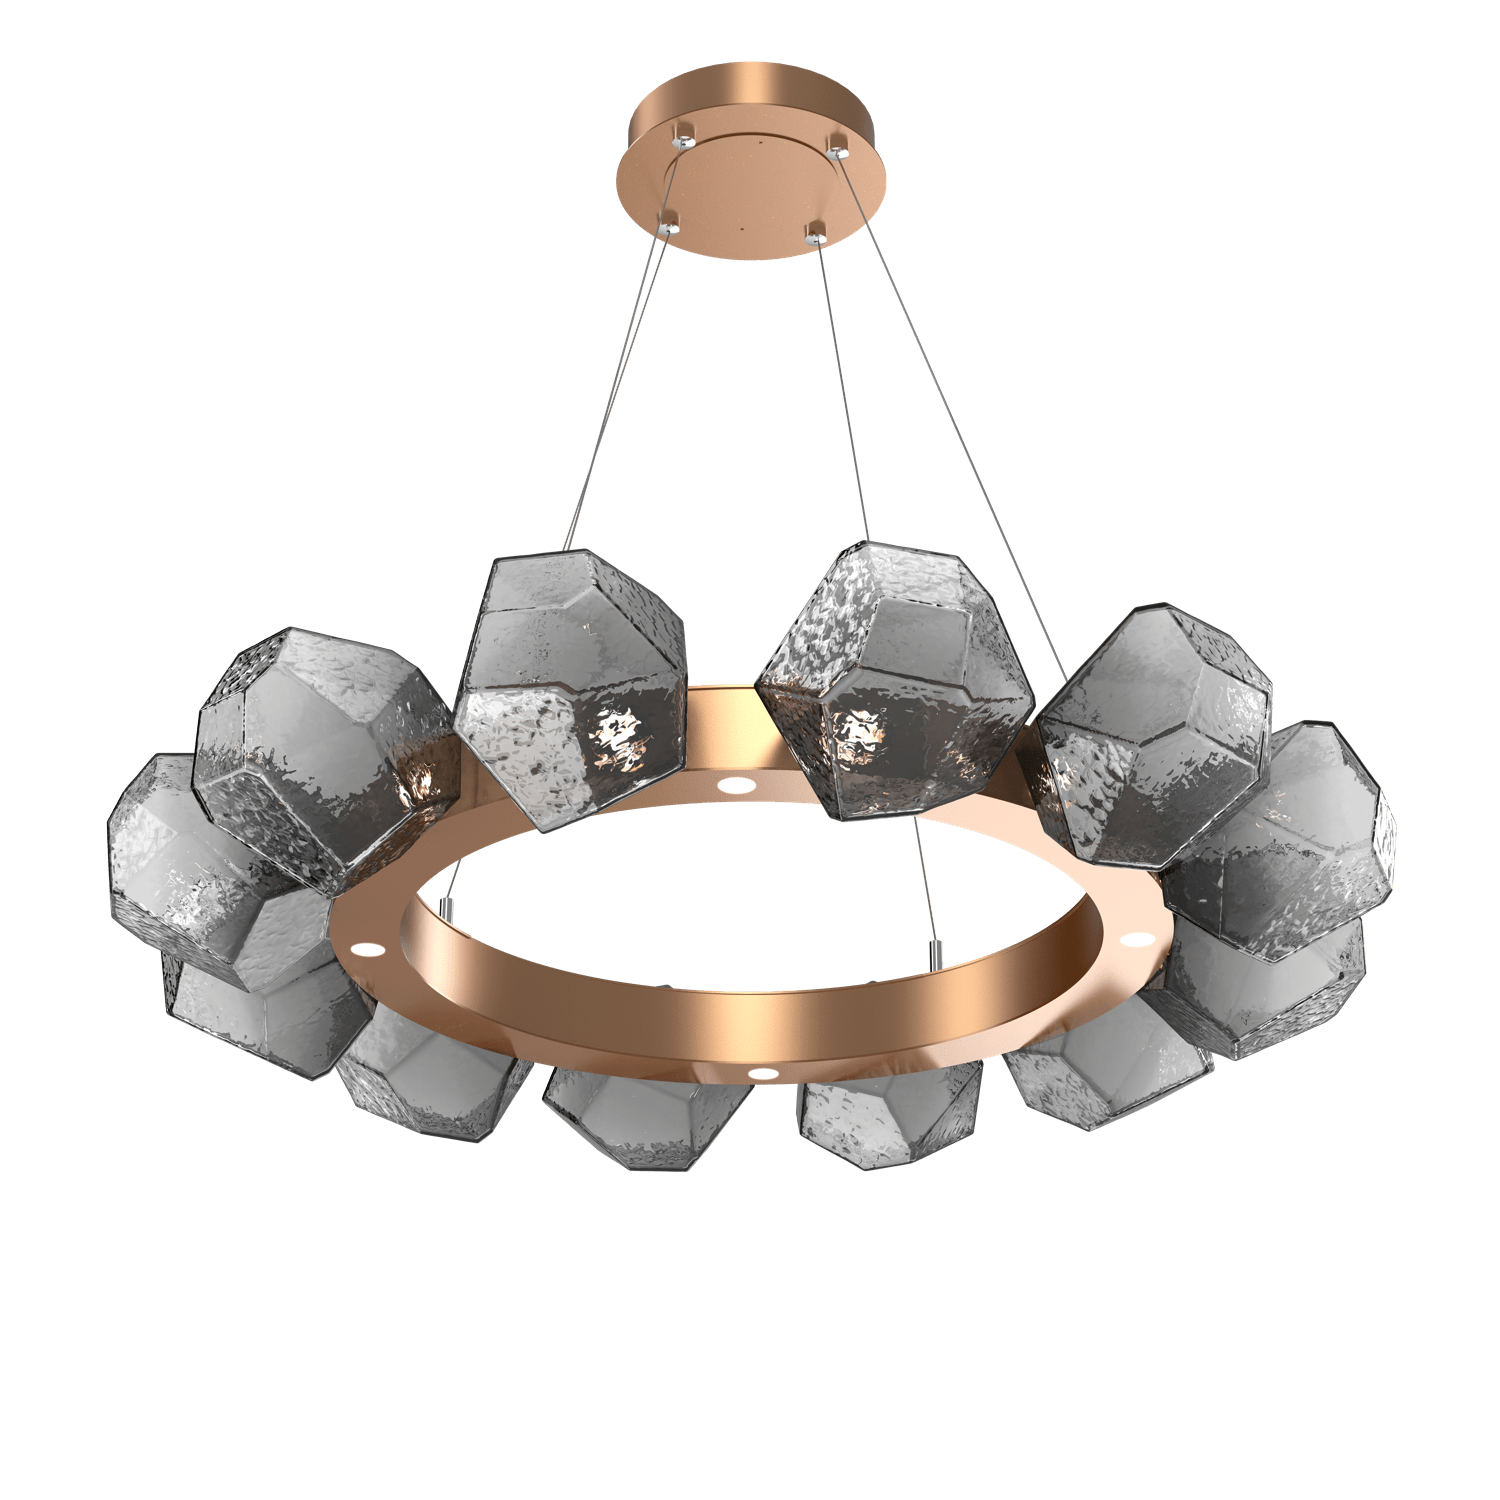 CHB0039-36-NB-S-Hammerton-Studio-Gem-36-inch-radial-ring-chandelier-with-novel-brass-finish-and-smoke-blown-glass-shades-and-LED-lamping